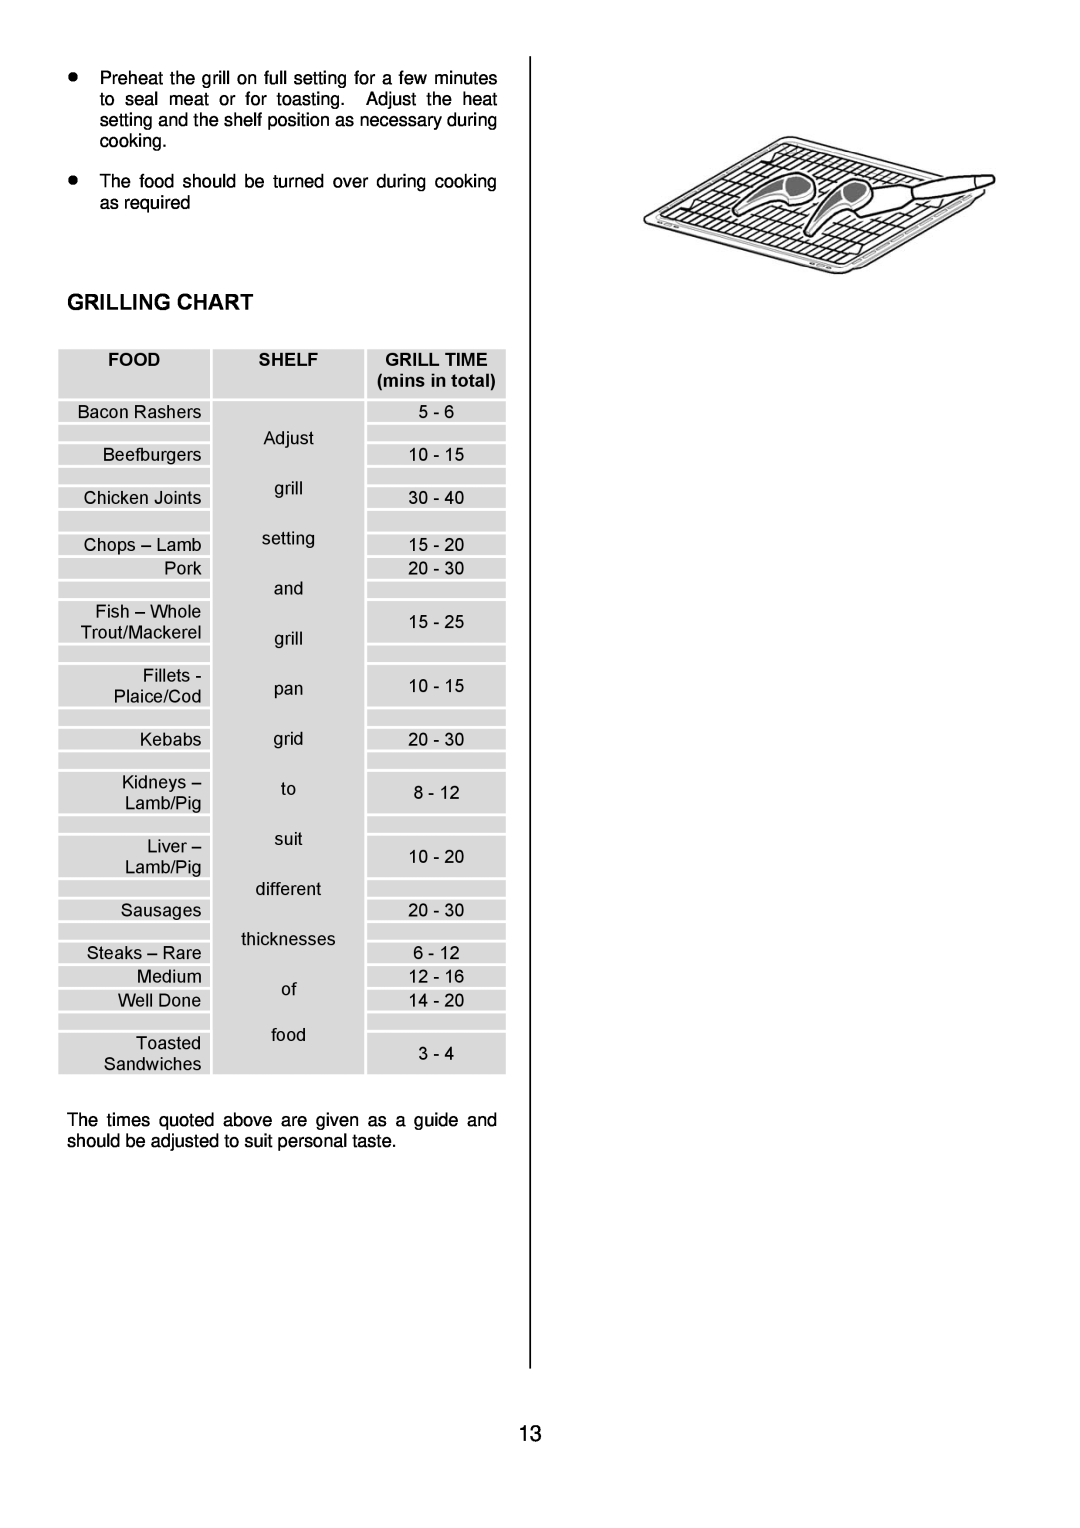 Electrolux D4101-5 manual Grilling Chart, Food, Shelf, GRILL TIME mins in total 